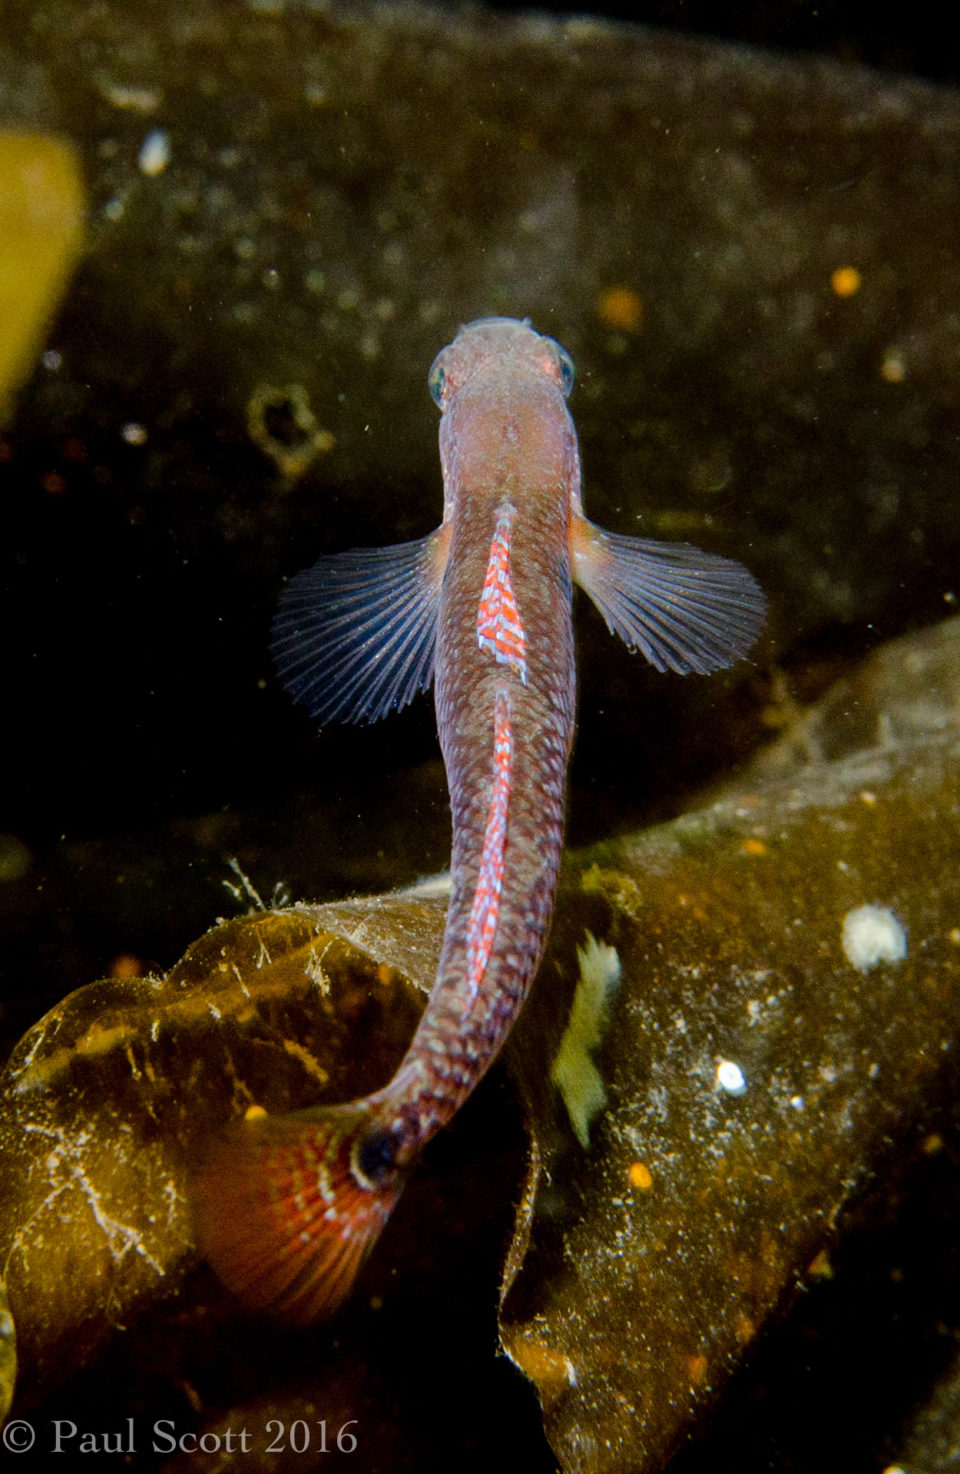 Two Spotted Goby - Gobiusculus flavescens